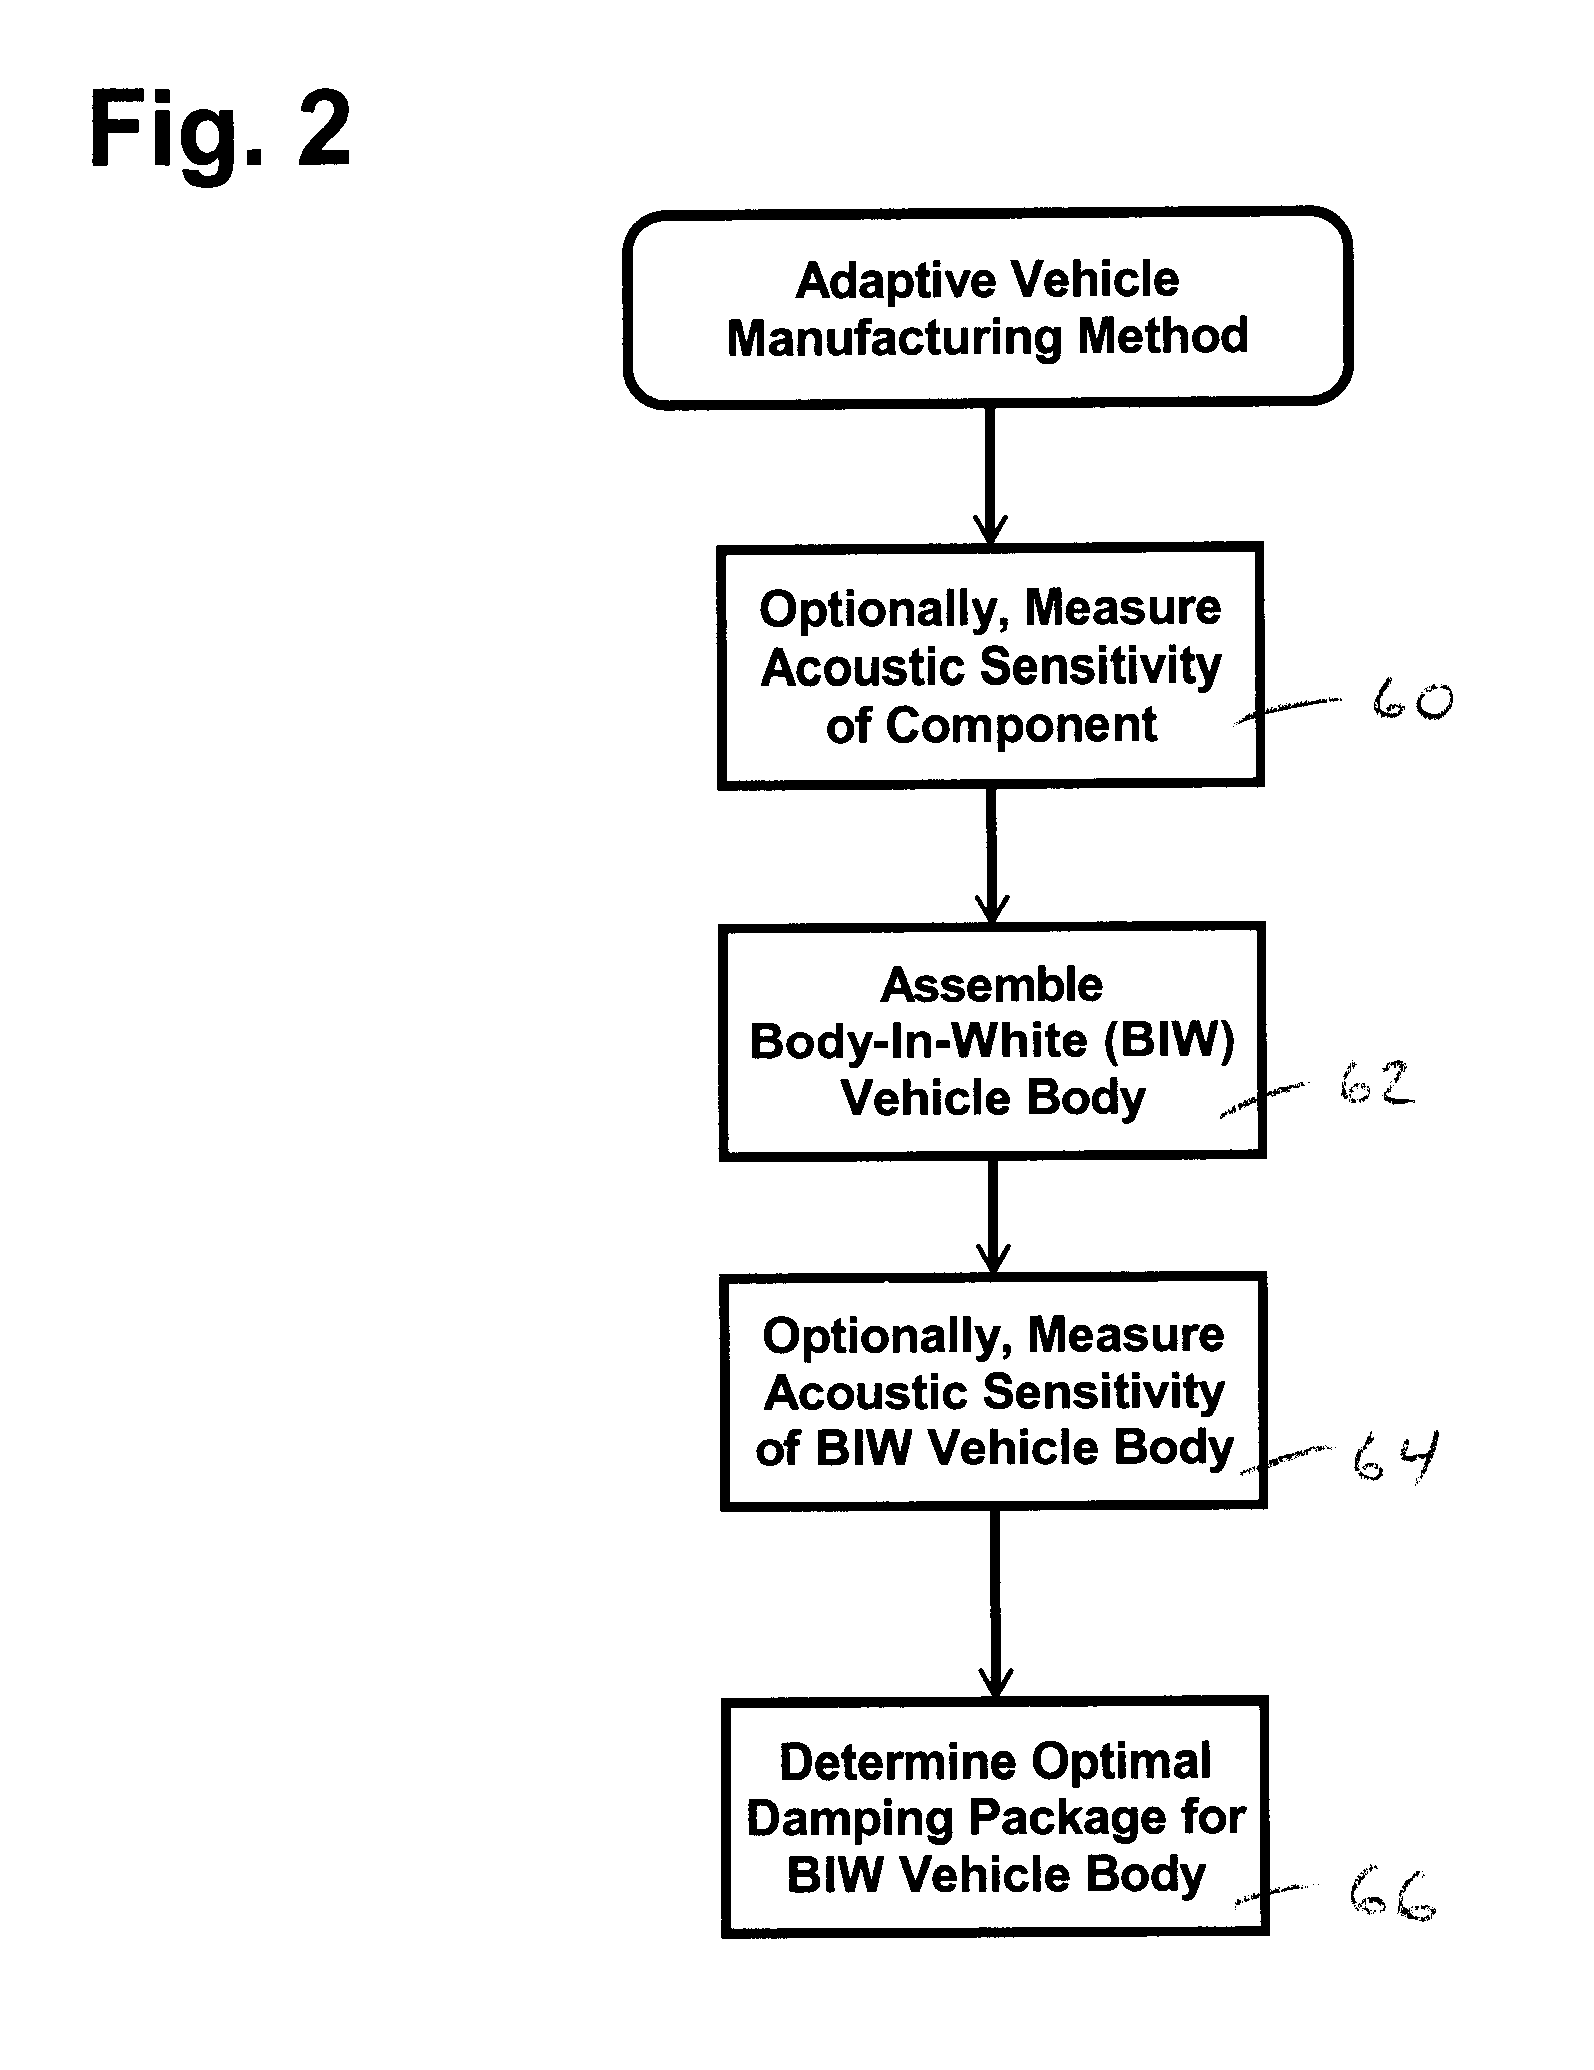 Adaptive vehicle manufacturing system and method